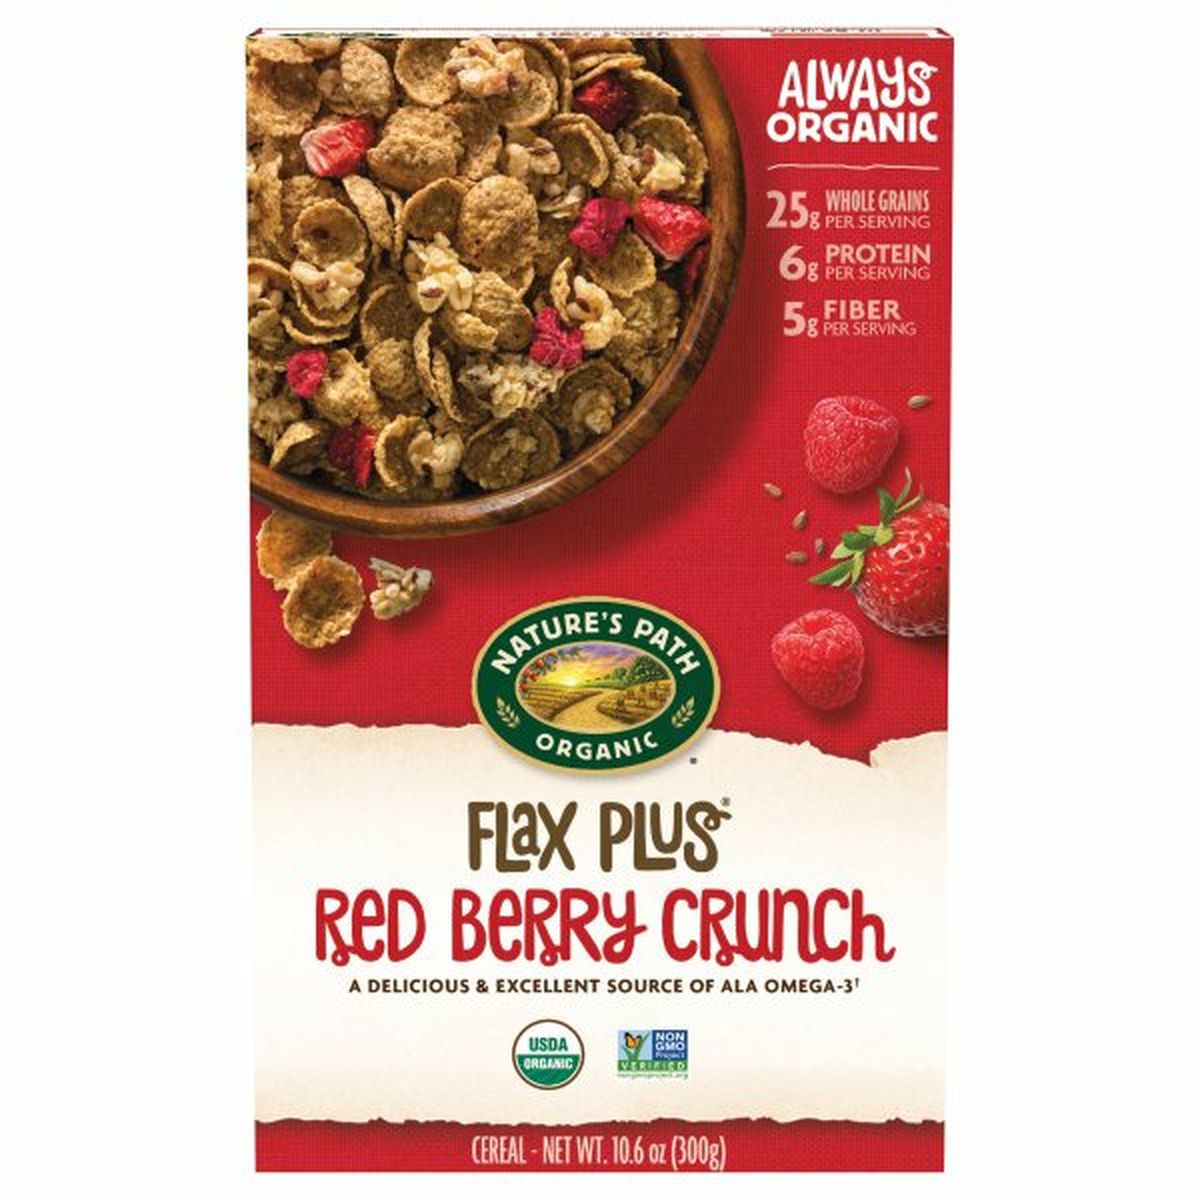 Calories in Nature's Path Flax Plus Cereal, Red Berry Crunch